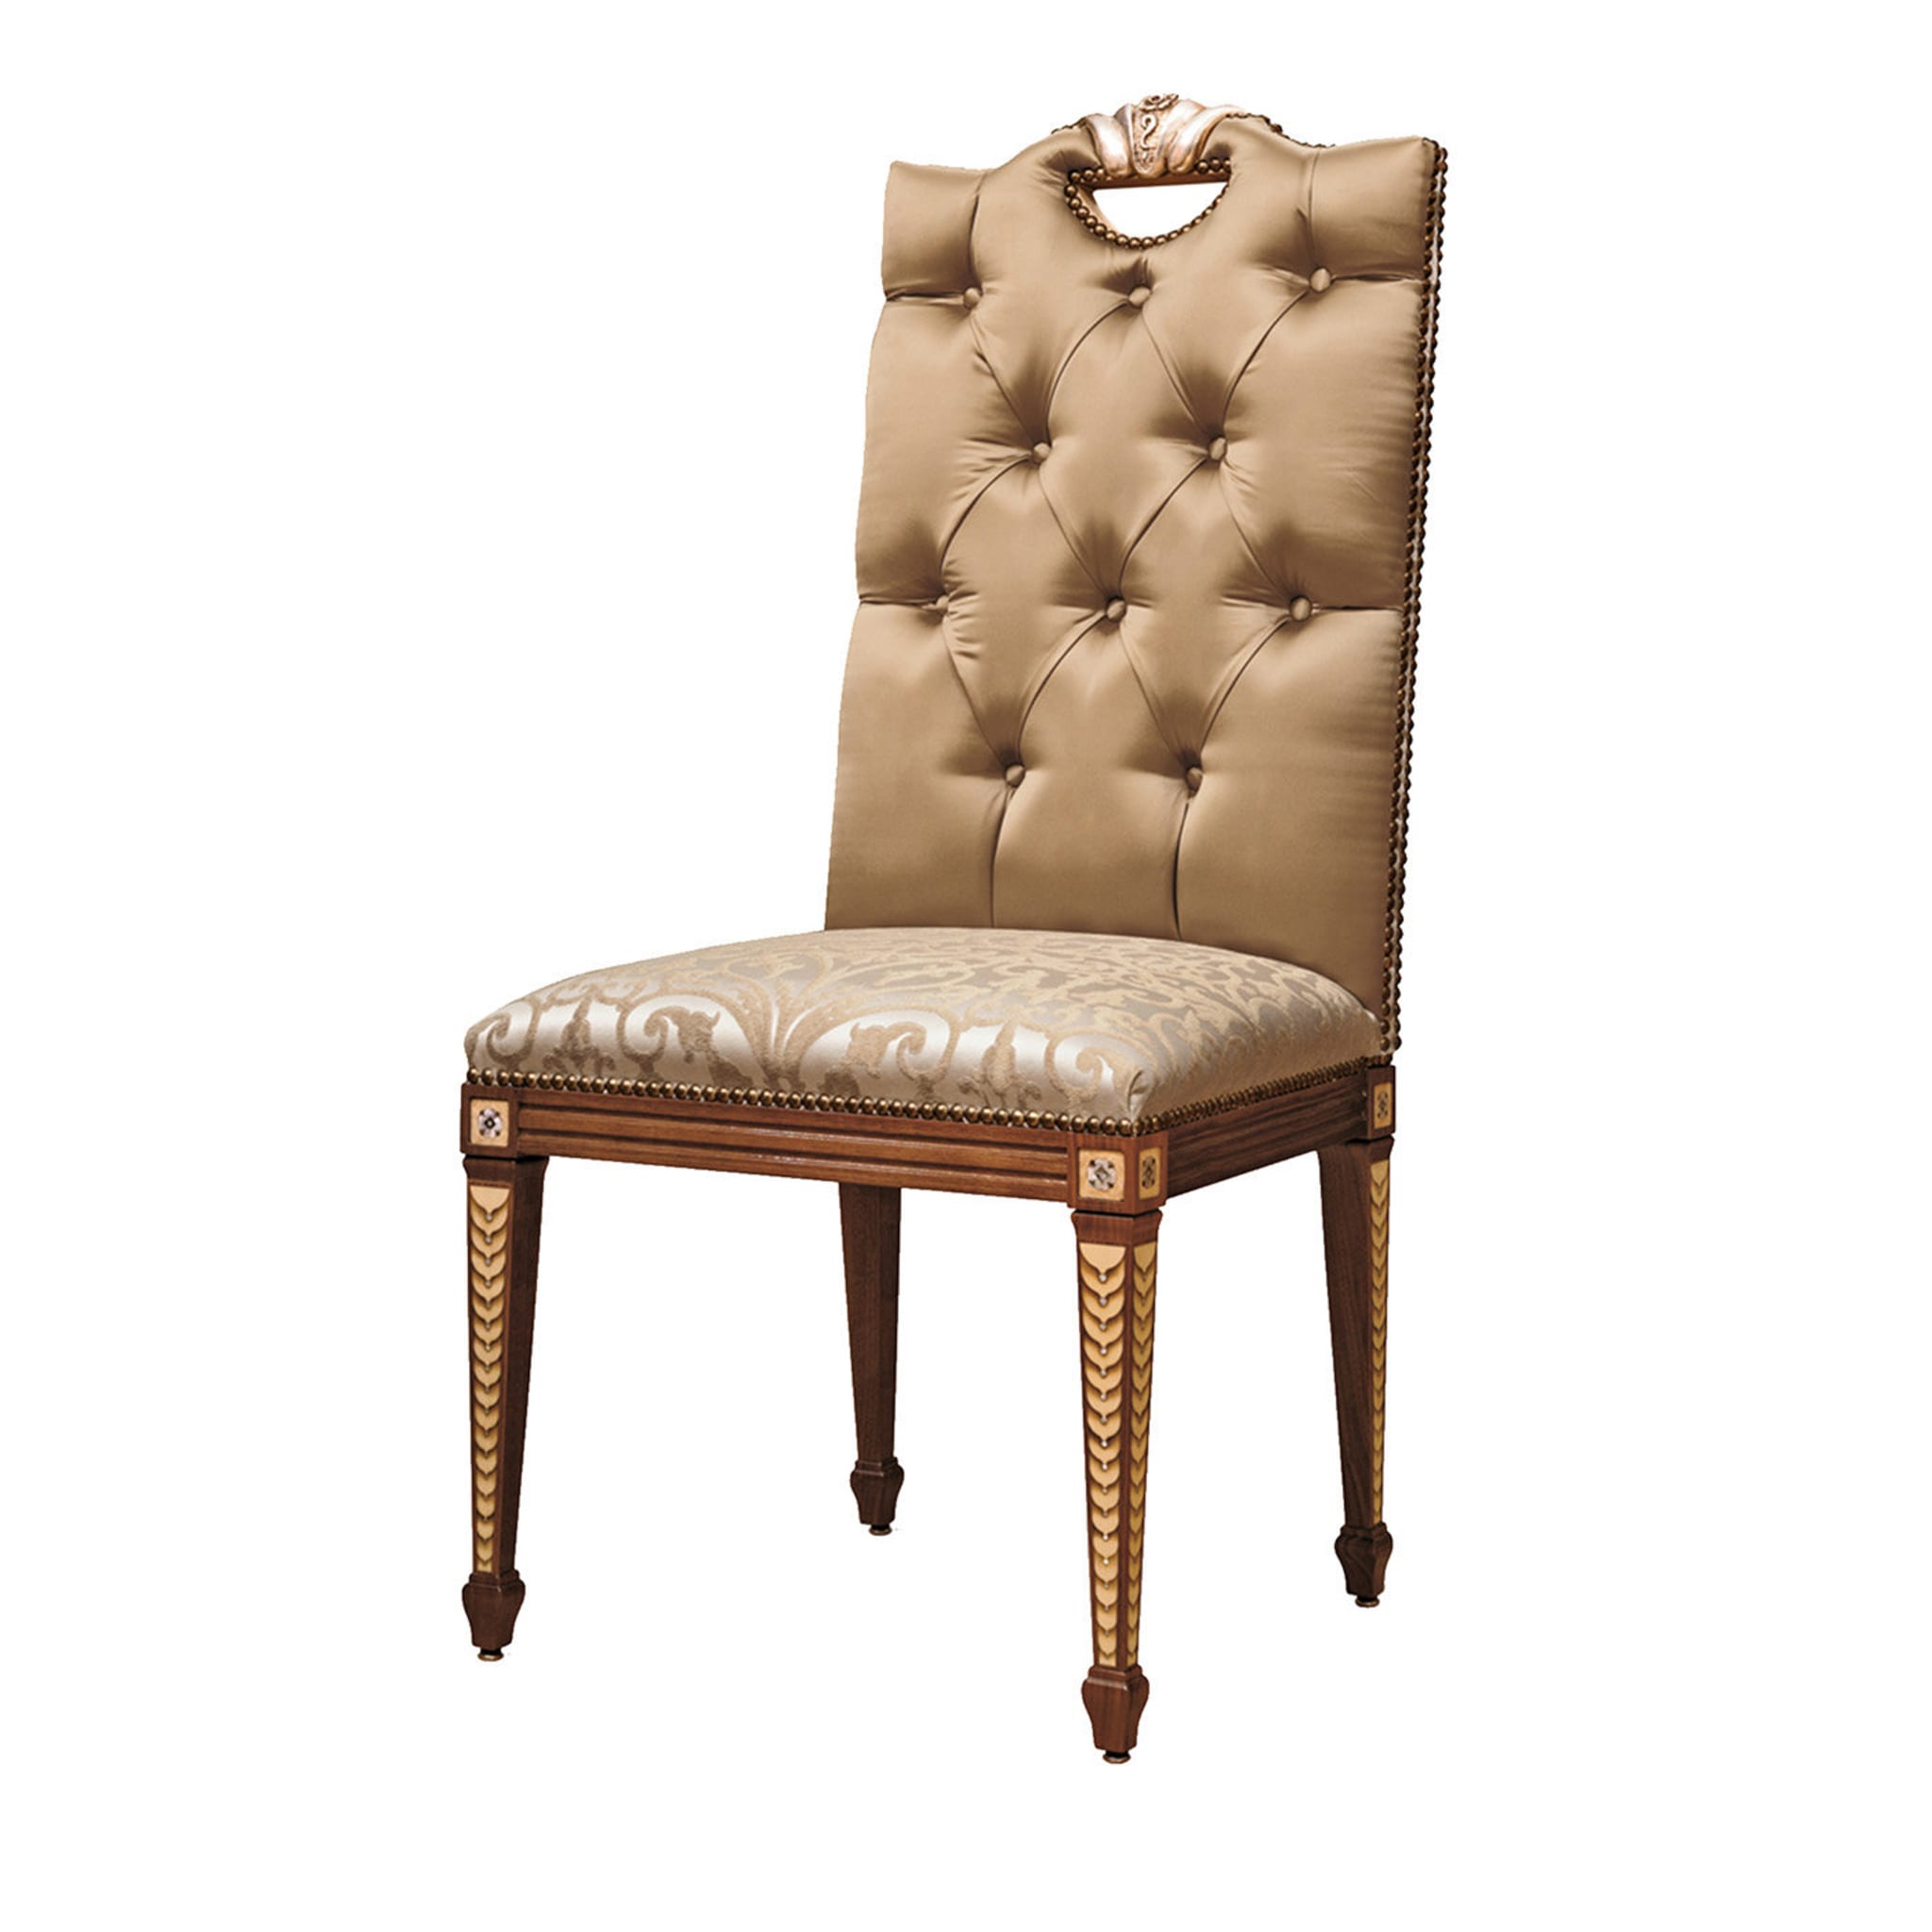 Upholstered Walnut Chair - Main view